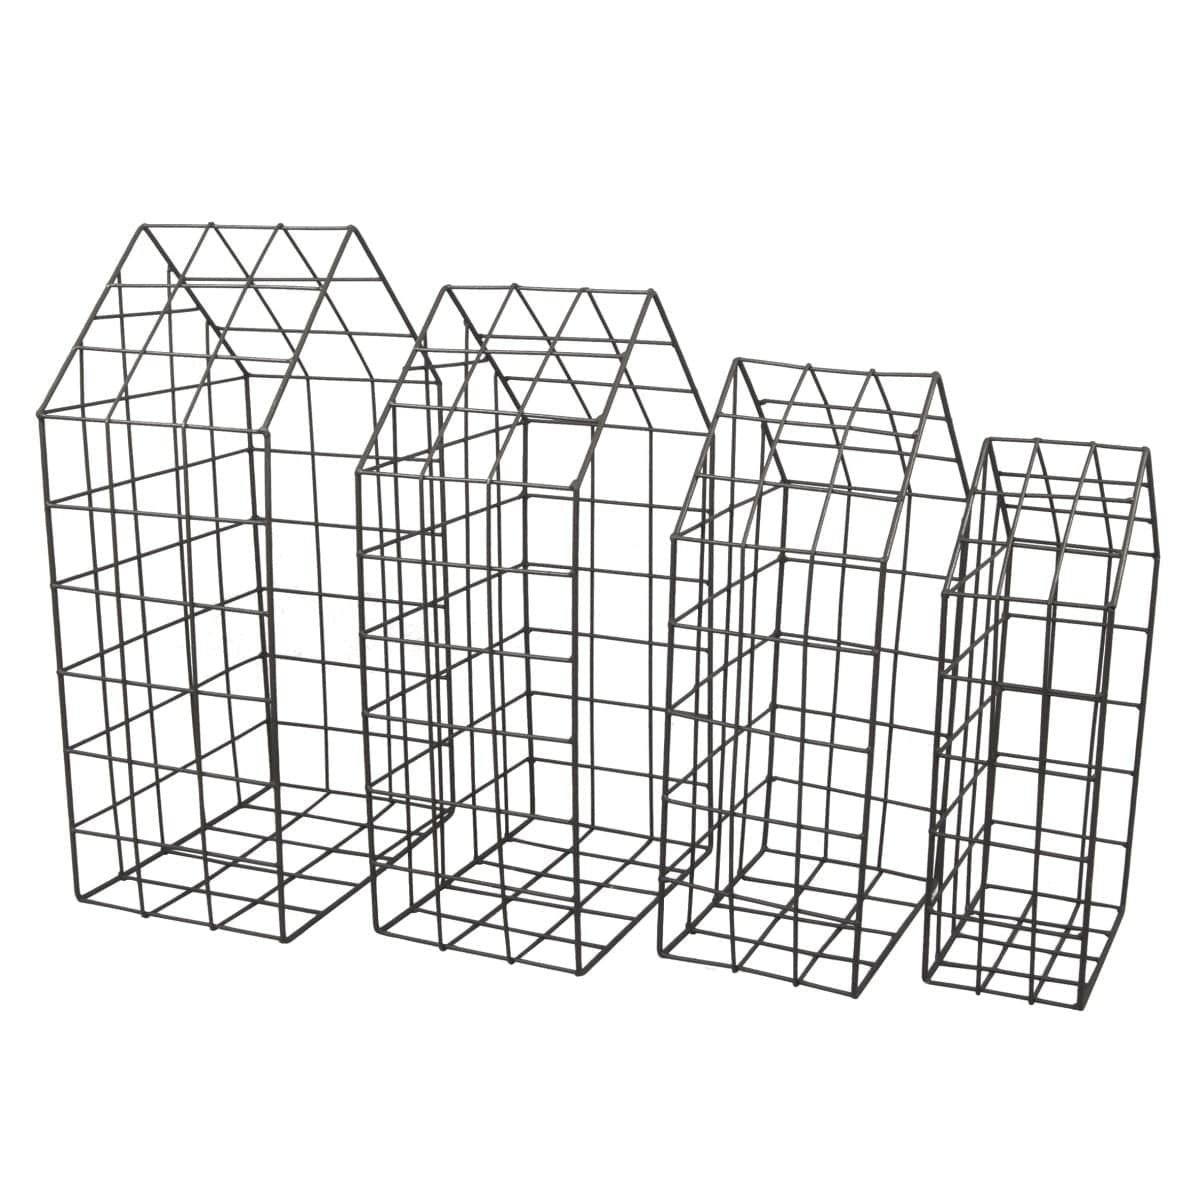 AB-HP42478 S/4 Grafton Wire Baskets- Rusty picket and rail